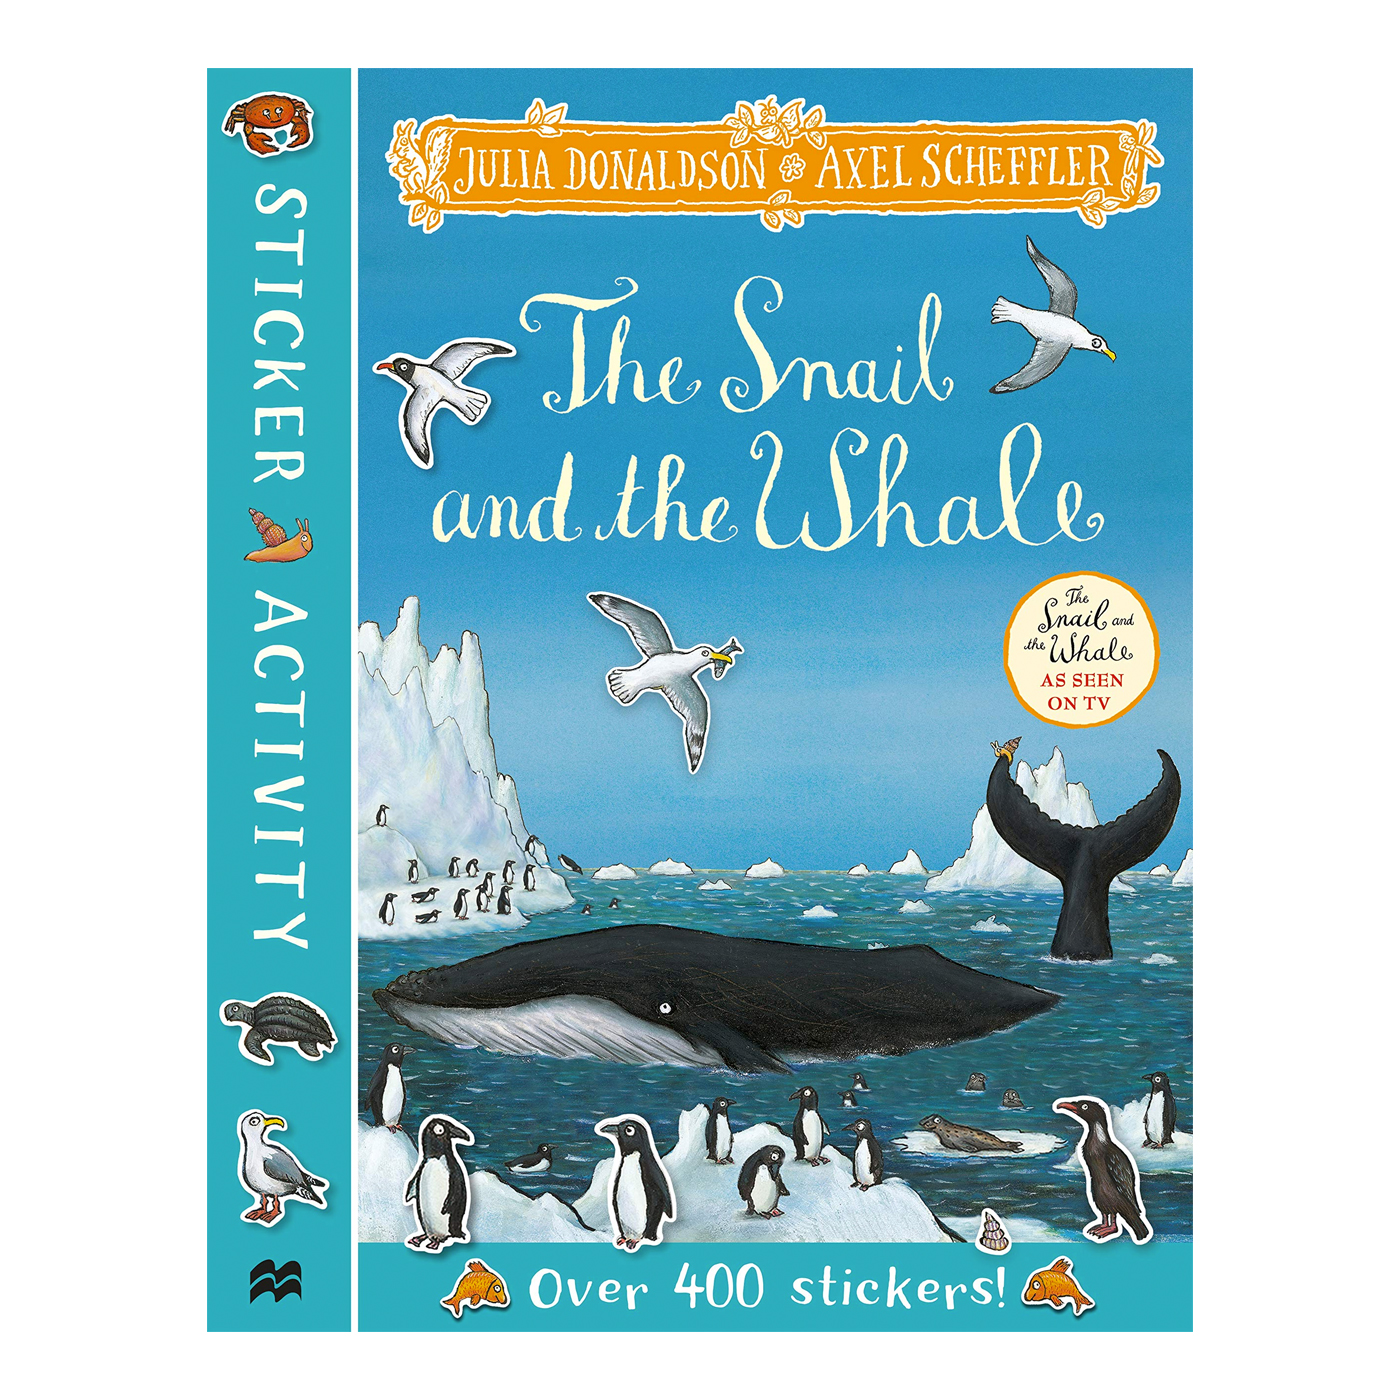  The Snail and the Whale Sticker Book